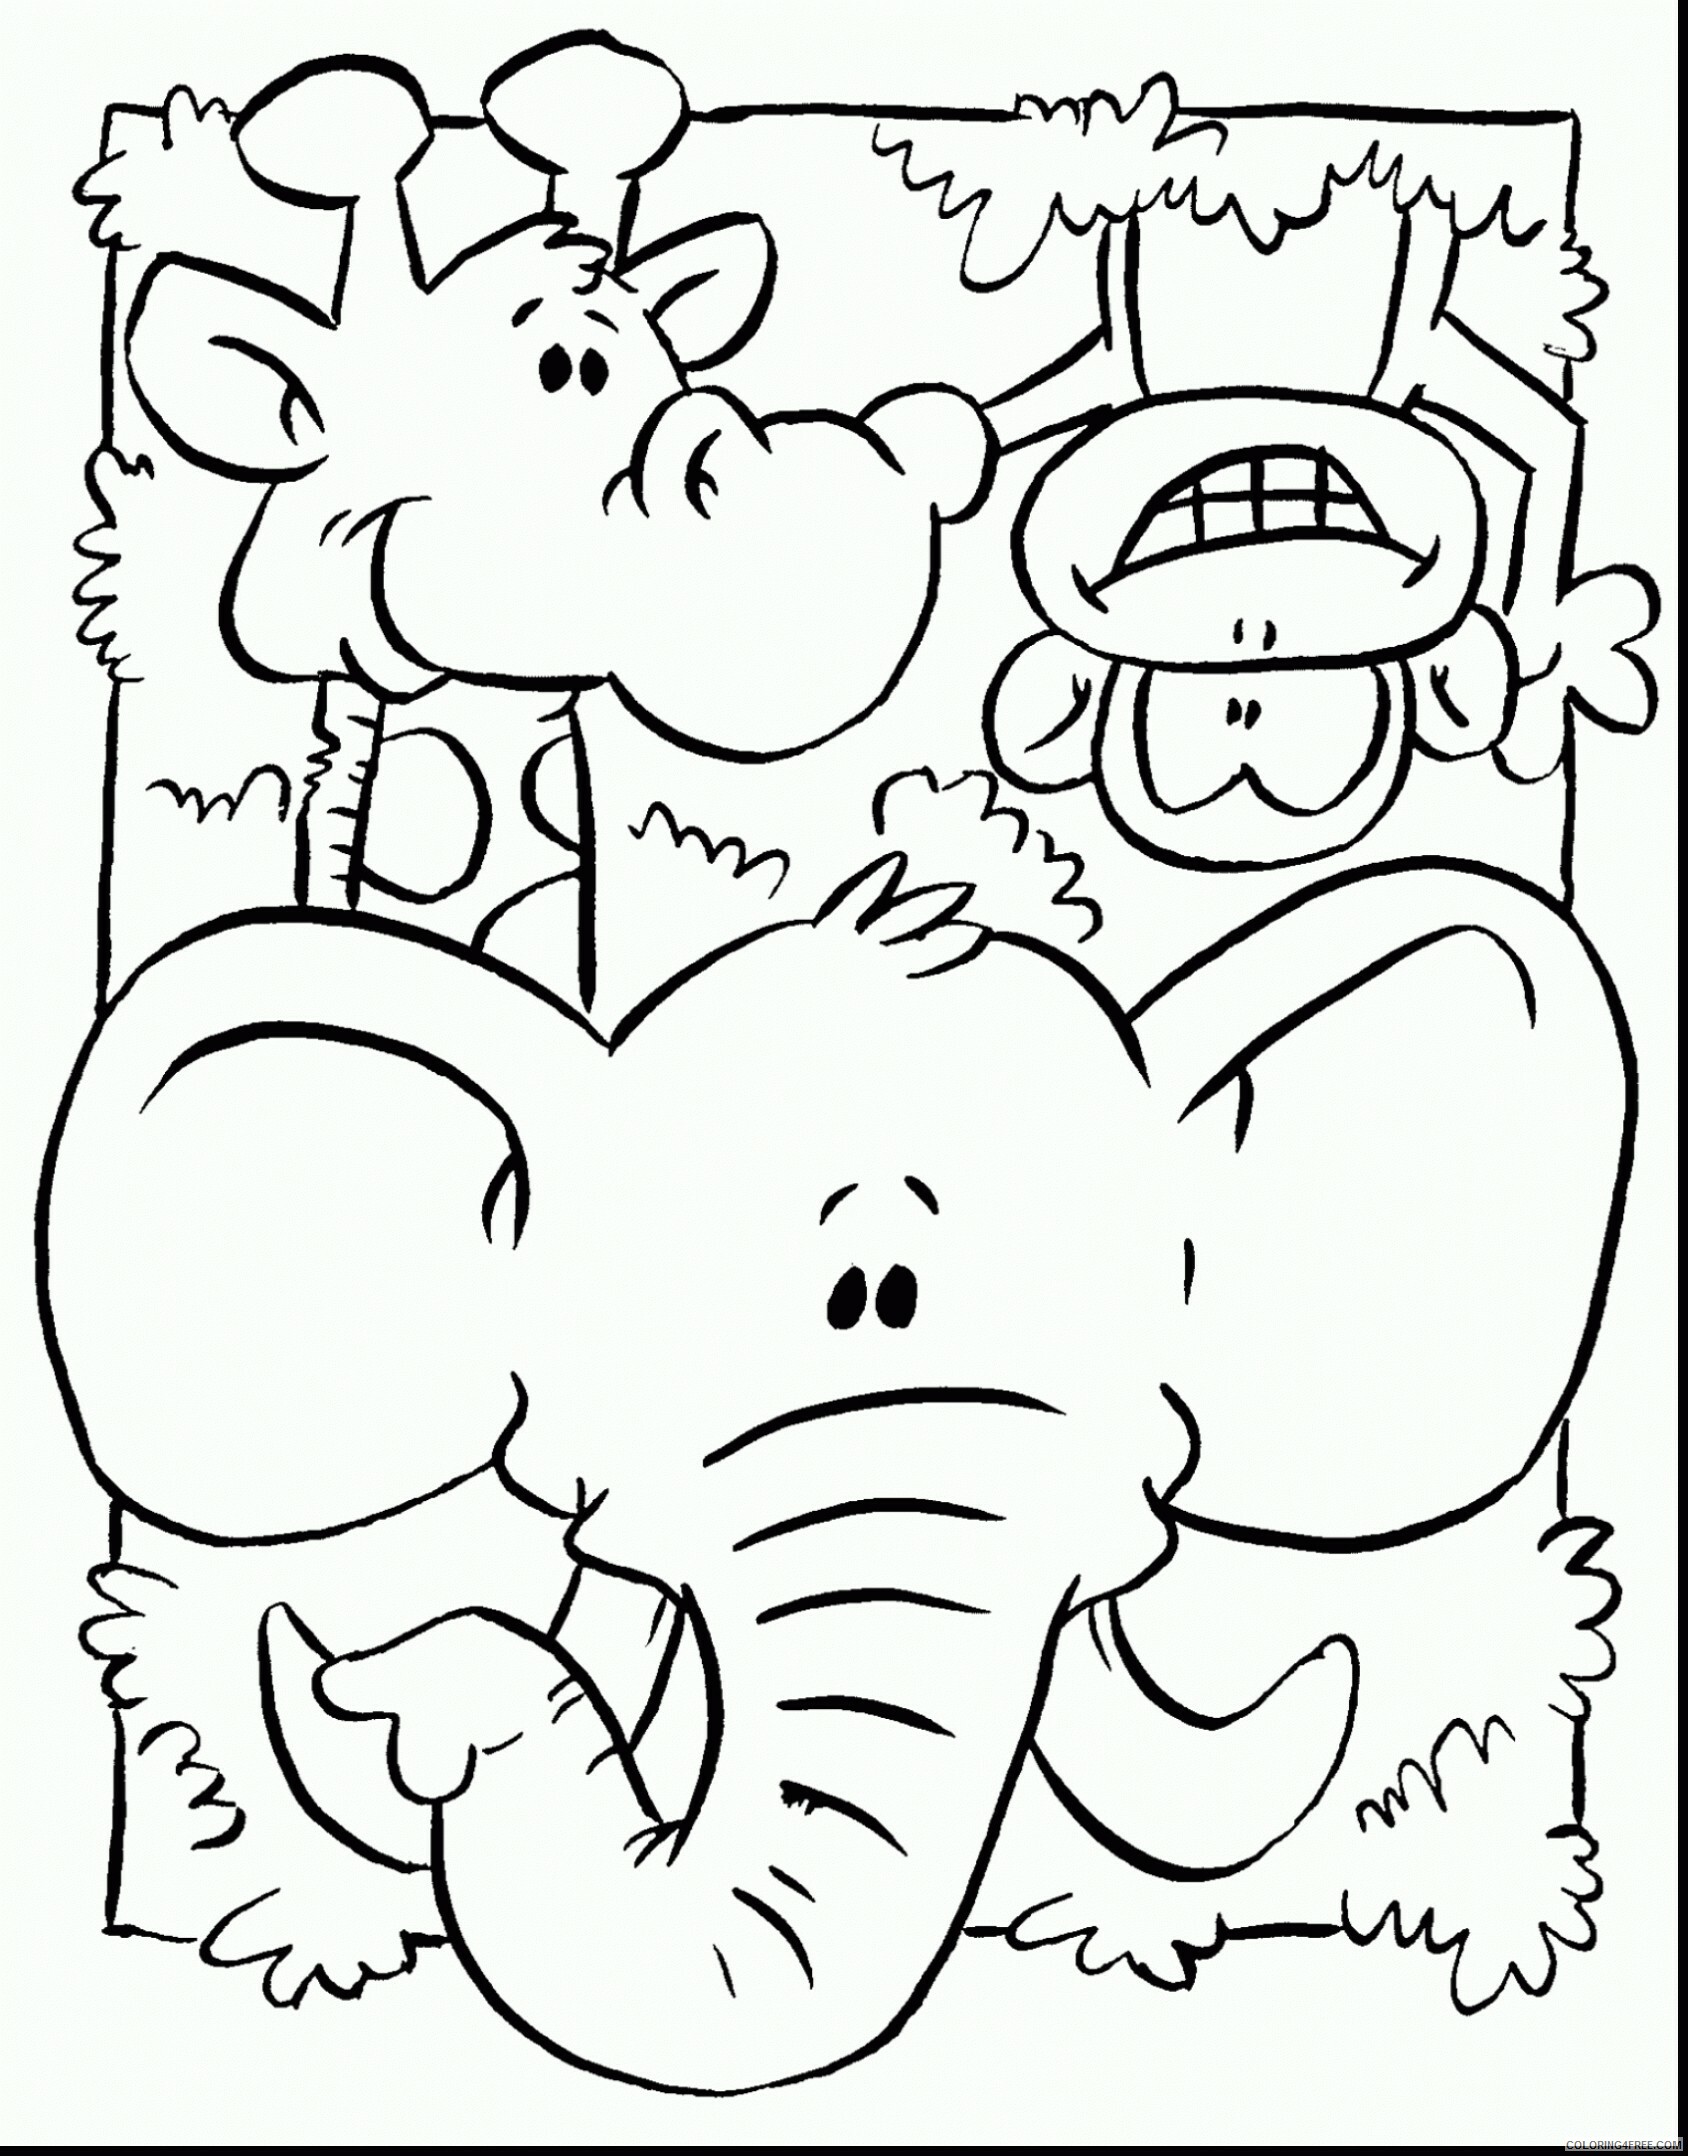 jungle-coloring-pages-nature-jungle-animal-printable-2021-265